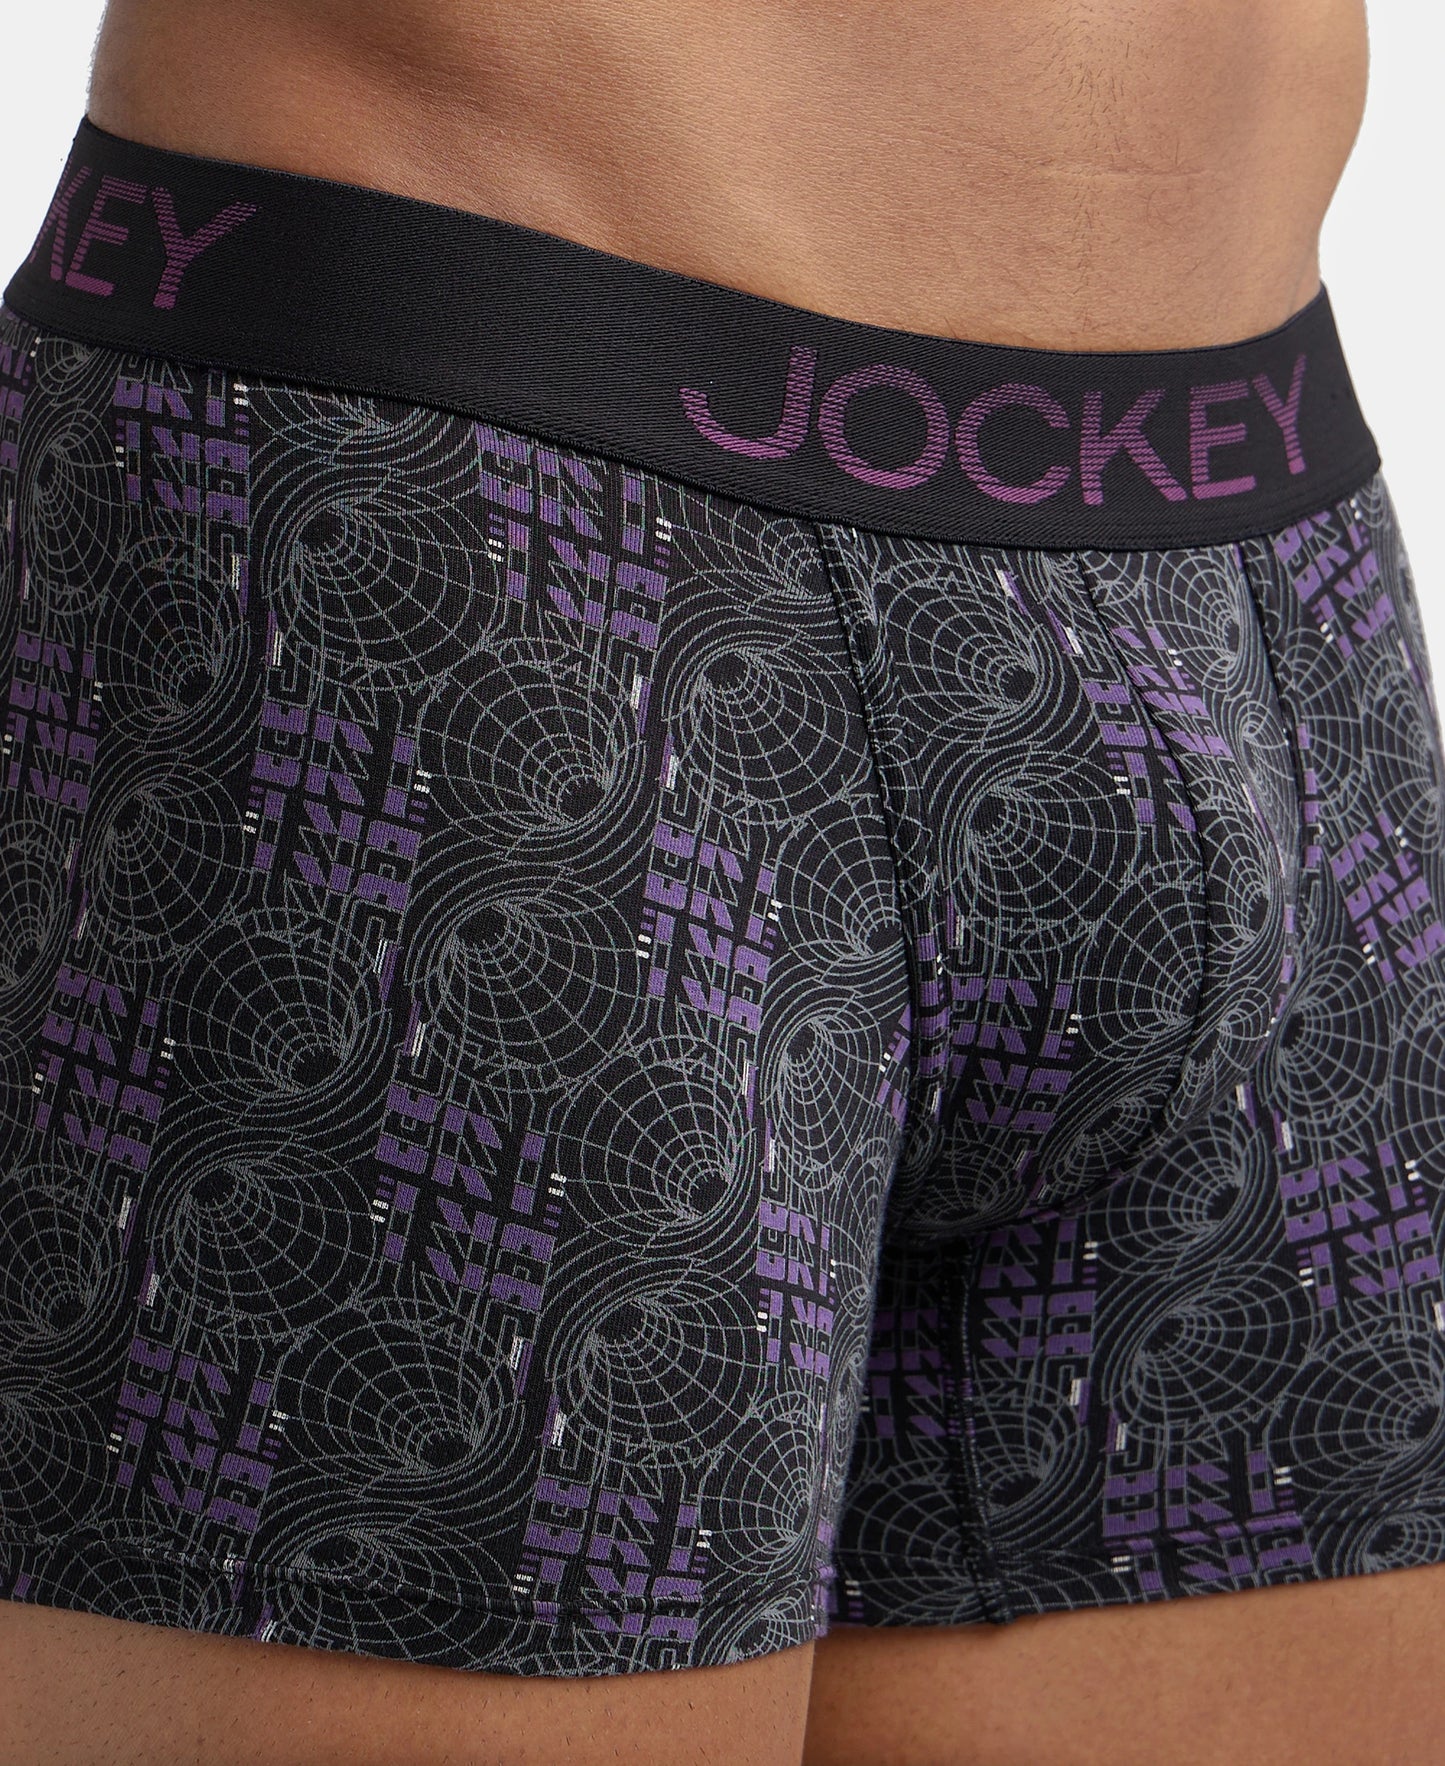 Super Combed Cotton Elastane Printed Trunk with Ultrasoft Waistband - Black & Plum-7